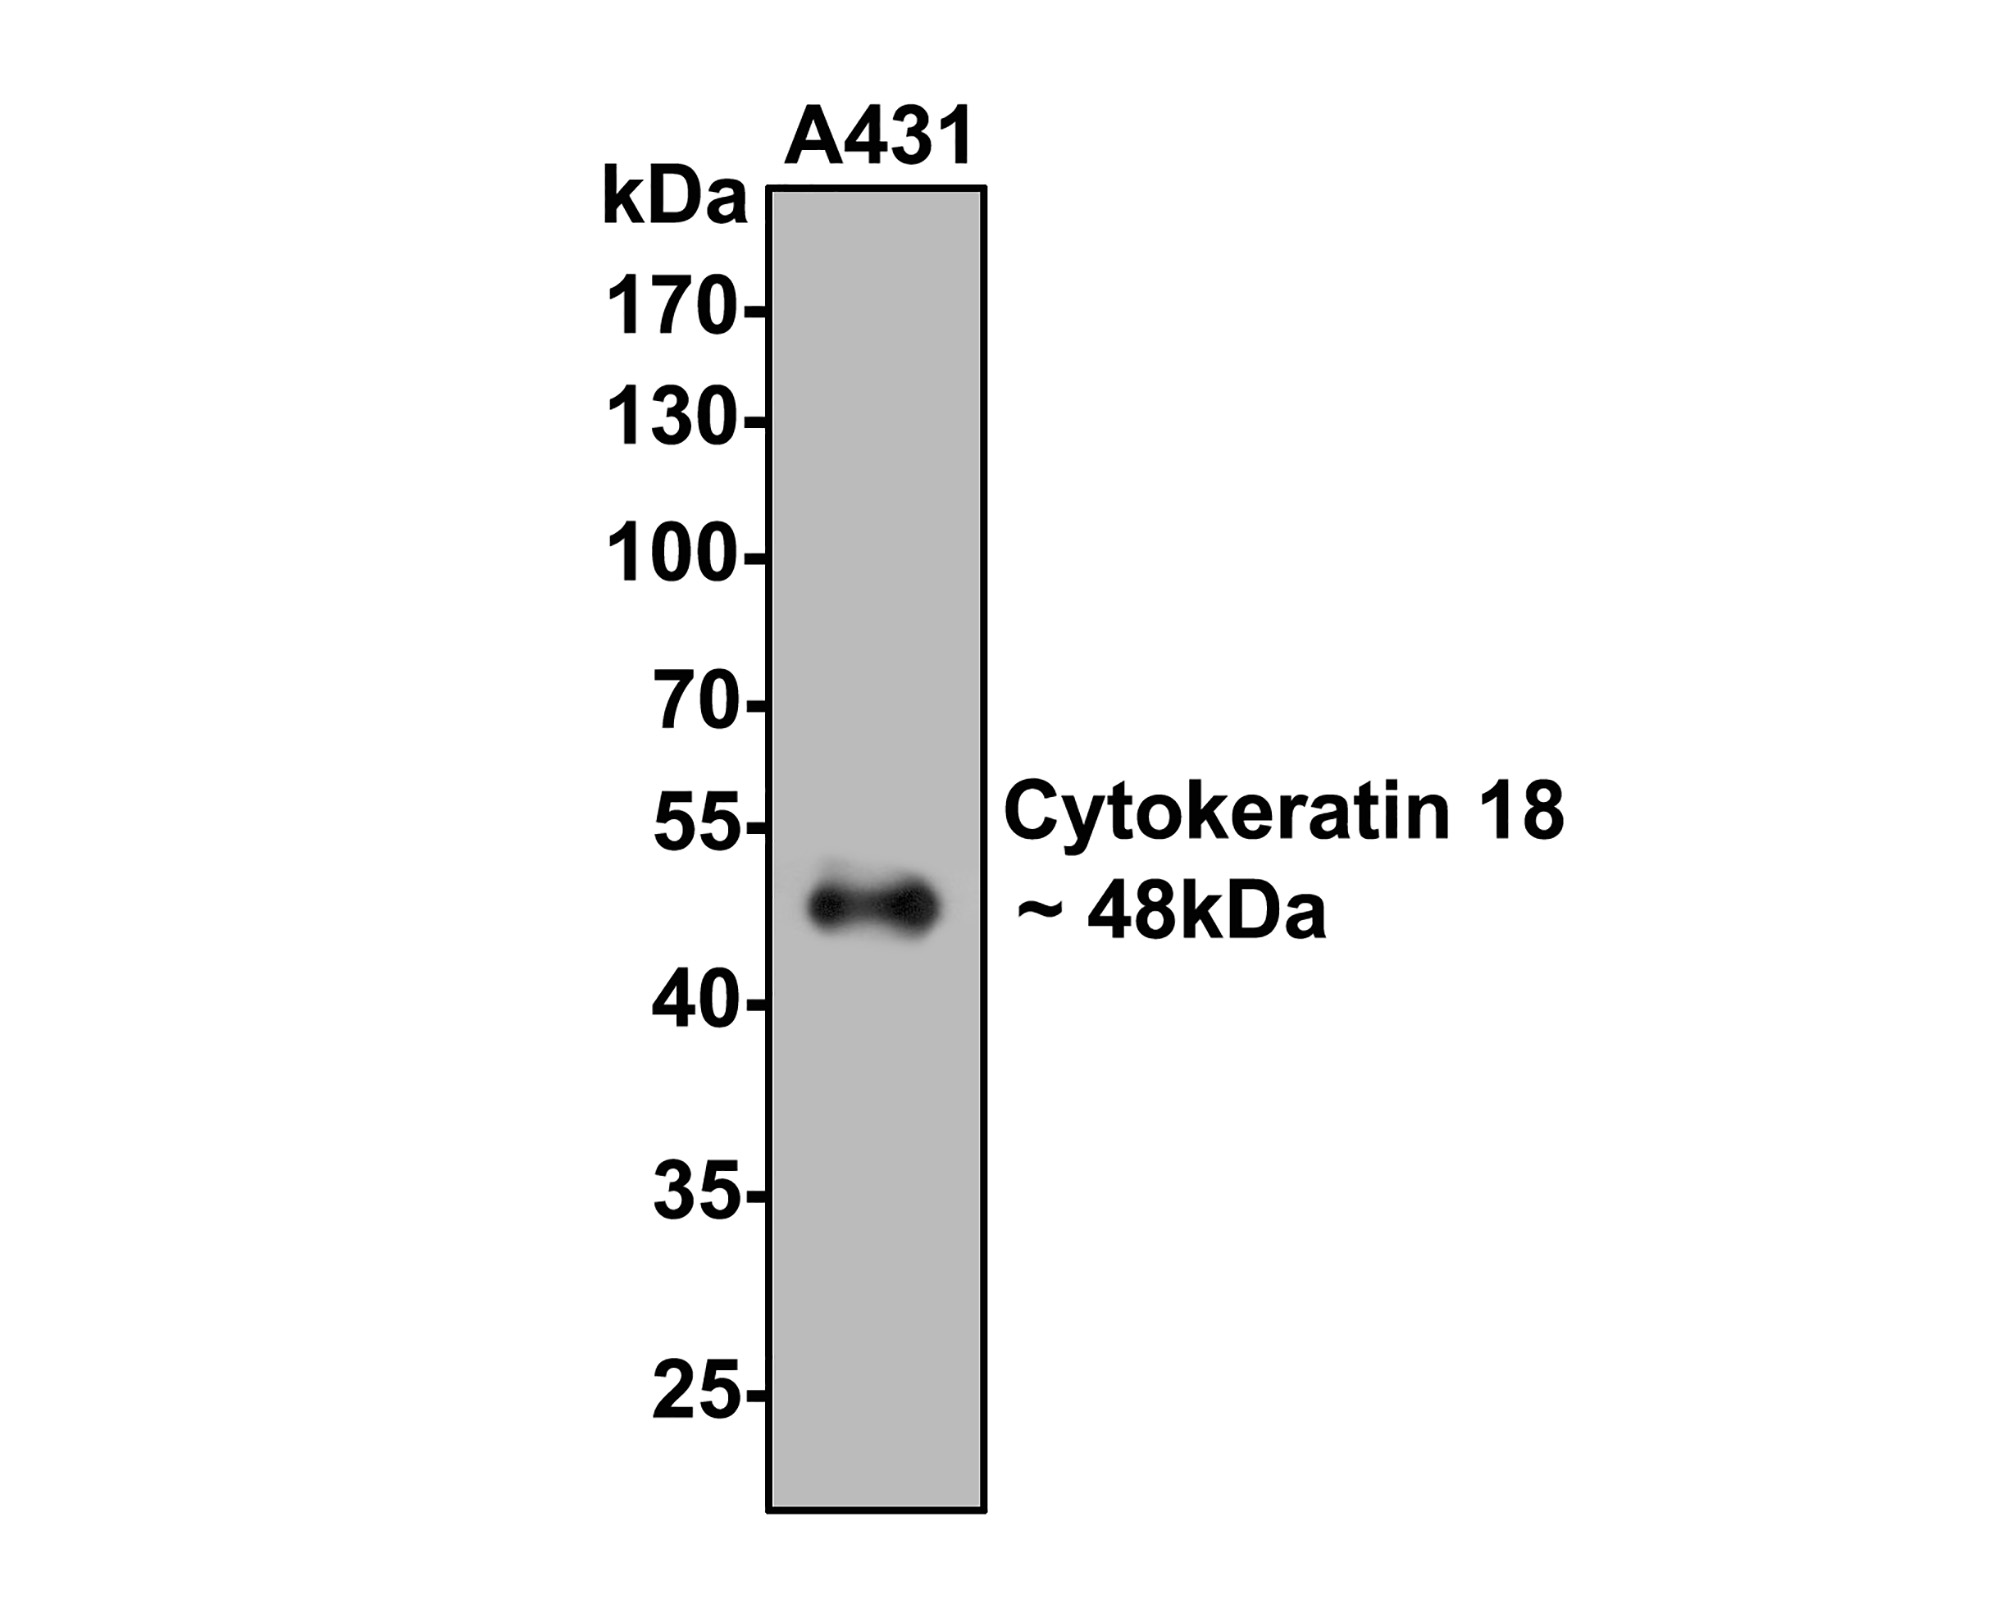 Western blot analysis of Cytokeratin 18 on A431 cell lysates with Rabbit anti-Cytokeratin 18 antibody (0407-1) at 1/500 dilution.<br />
<br />
Lysates/proteins at 10 µg/Lane.<br />
<br />
Predicted band size: 48 kDa<br />
Observed band size: 48 kDa<br />
<br />
Exposure time: 30 seconds;<br />
<br />
10% SDS-PAGE gel.<br />
<br />
Proteins were transferred to a PVDF membrane and blocked with 5% NFDM/TBST for 1 hour at room temperature. The primary antibody (0407-1) at 1/500 dilution was used in 5% NFDM/TBST at room temperature for 2 hours. Goat Anti-Rabbit IgG - HRP Secondary Antibody (HA1001) at 1:40,000 dilution was used for 1 hour at room temperature.